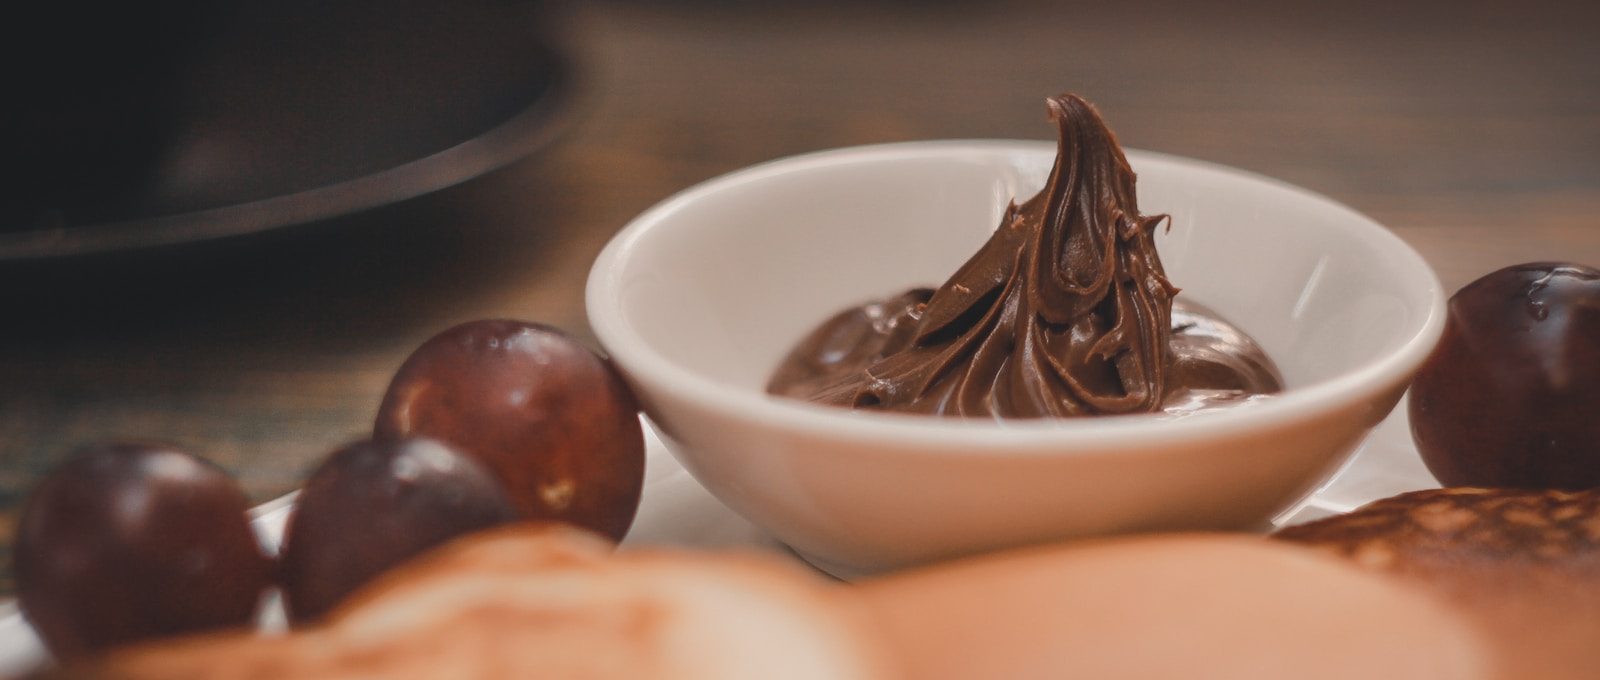 brown and white chocolate on white ceramic bowl